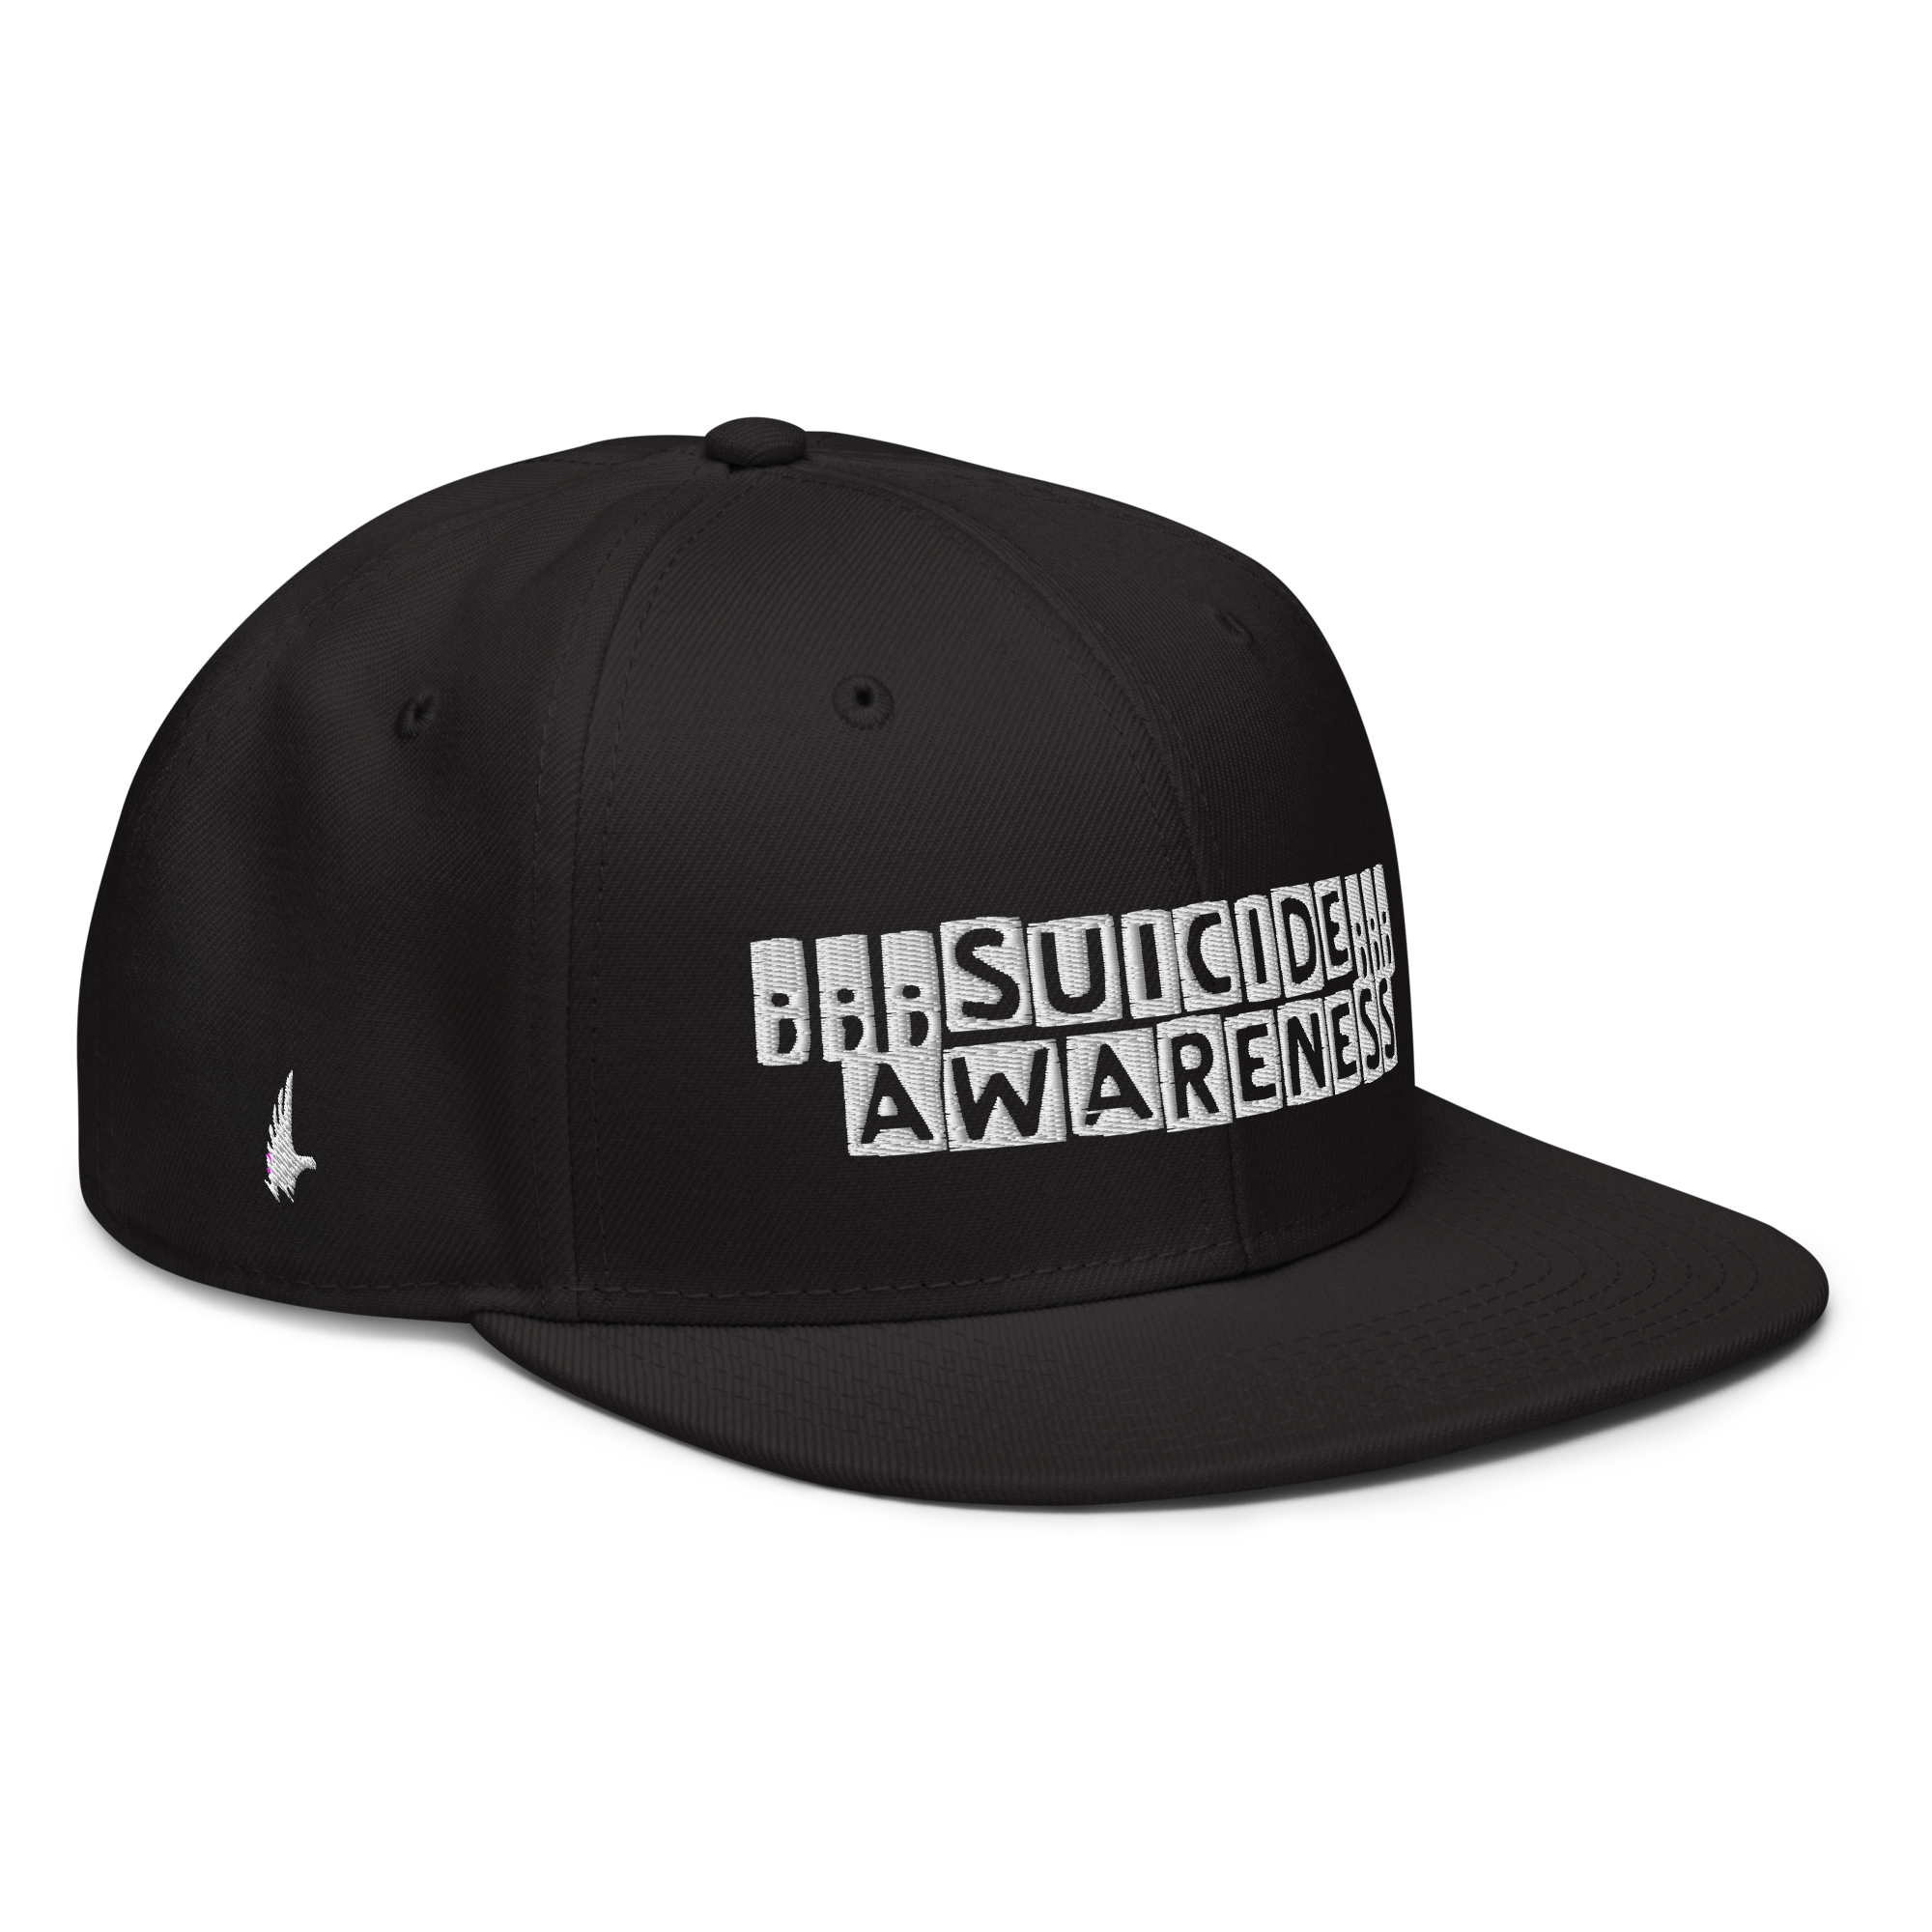 Suicide Awareness Snapback Hat - Black OS - Loyalty Vibes